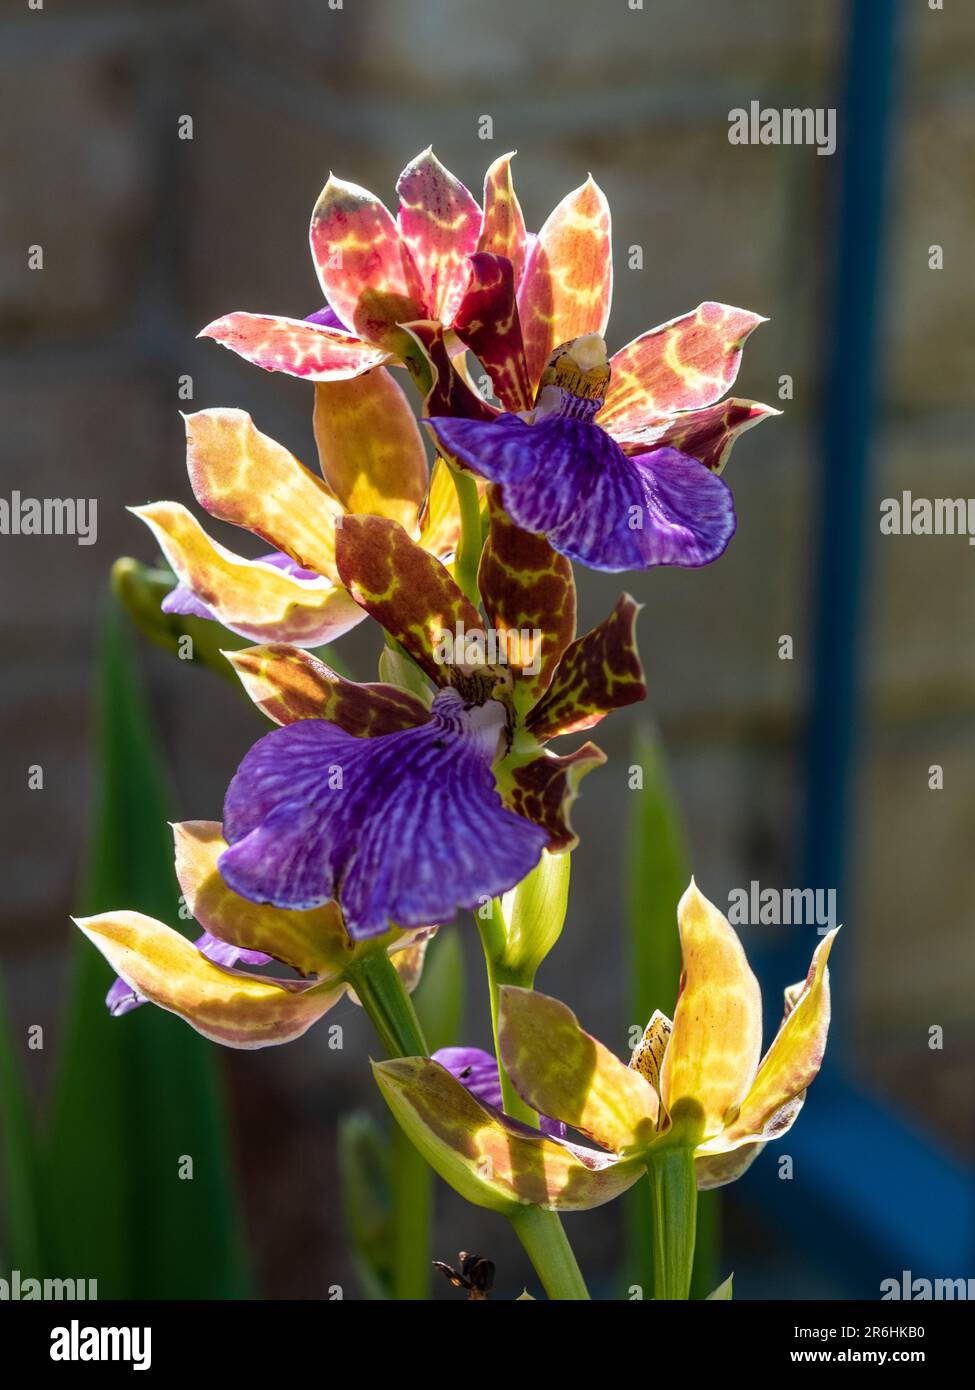 A stem of purple with dark red and yellow patterns Zygopetalum orchid flowers in the morning sunlight, Australian coastal garden Stock Photo